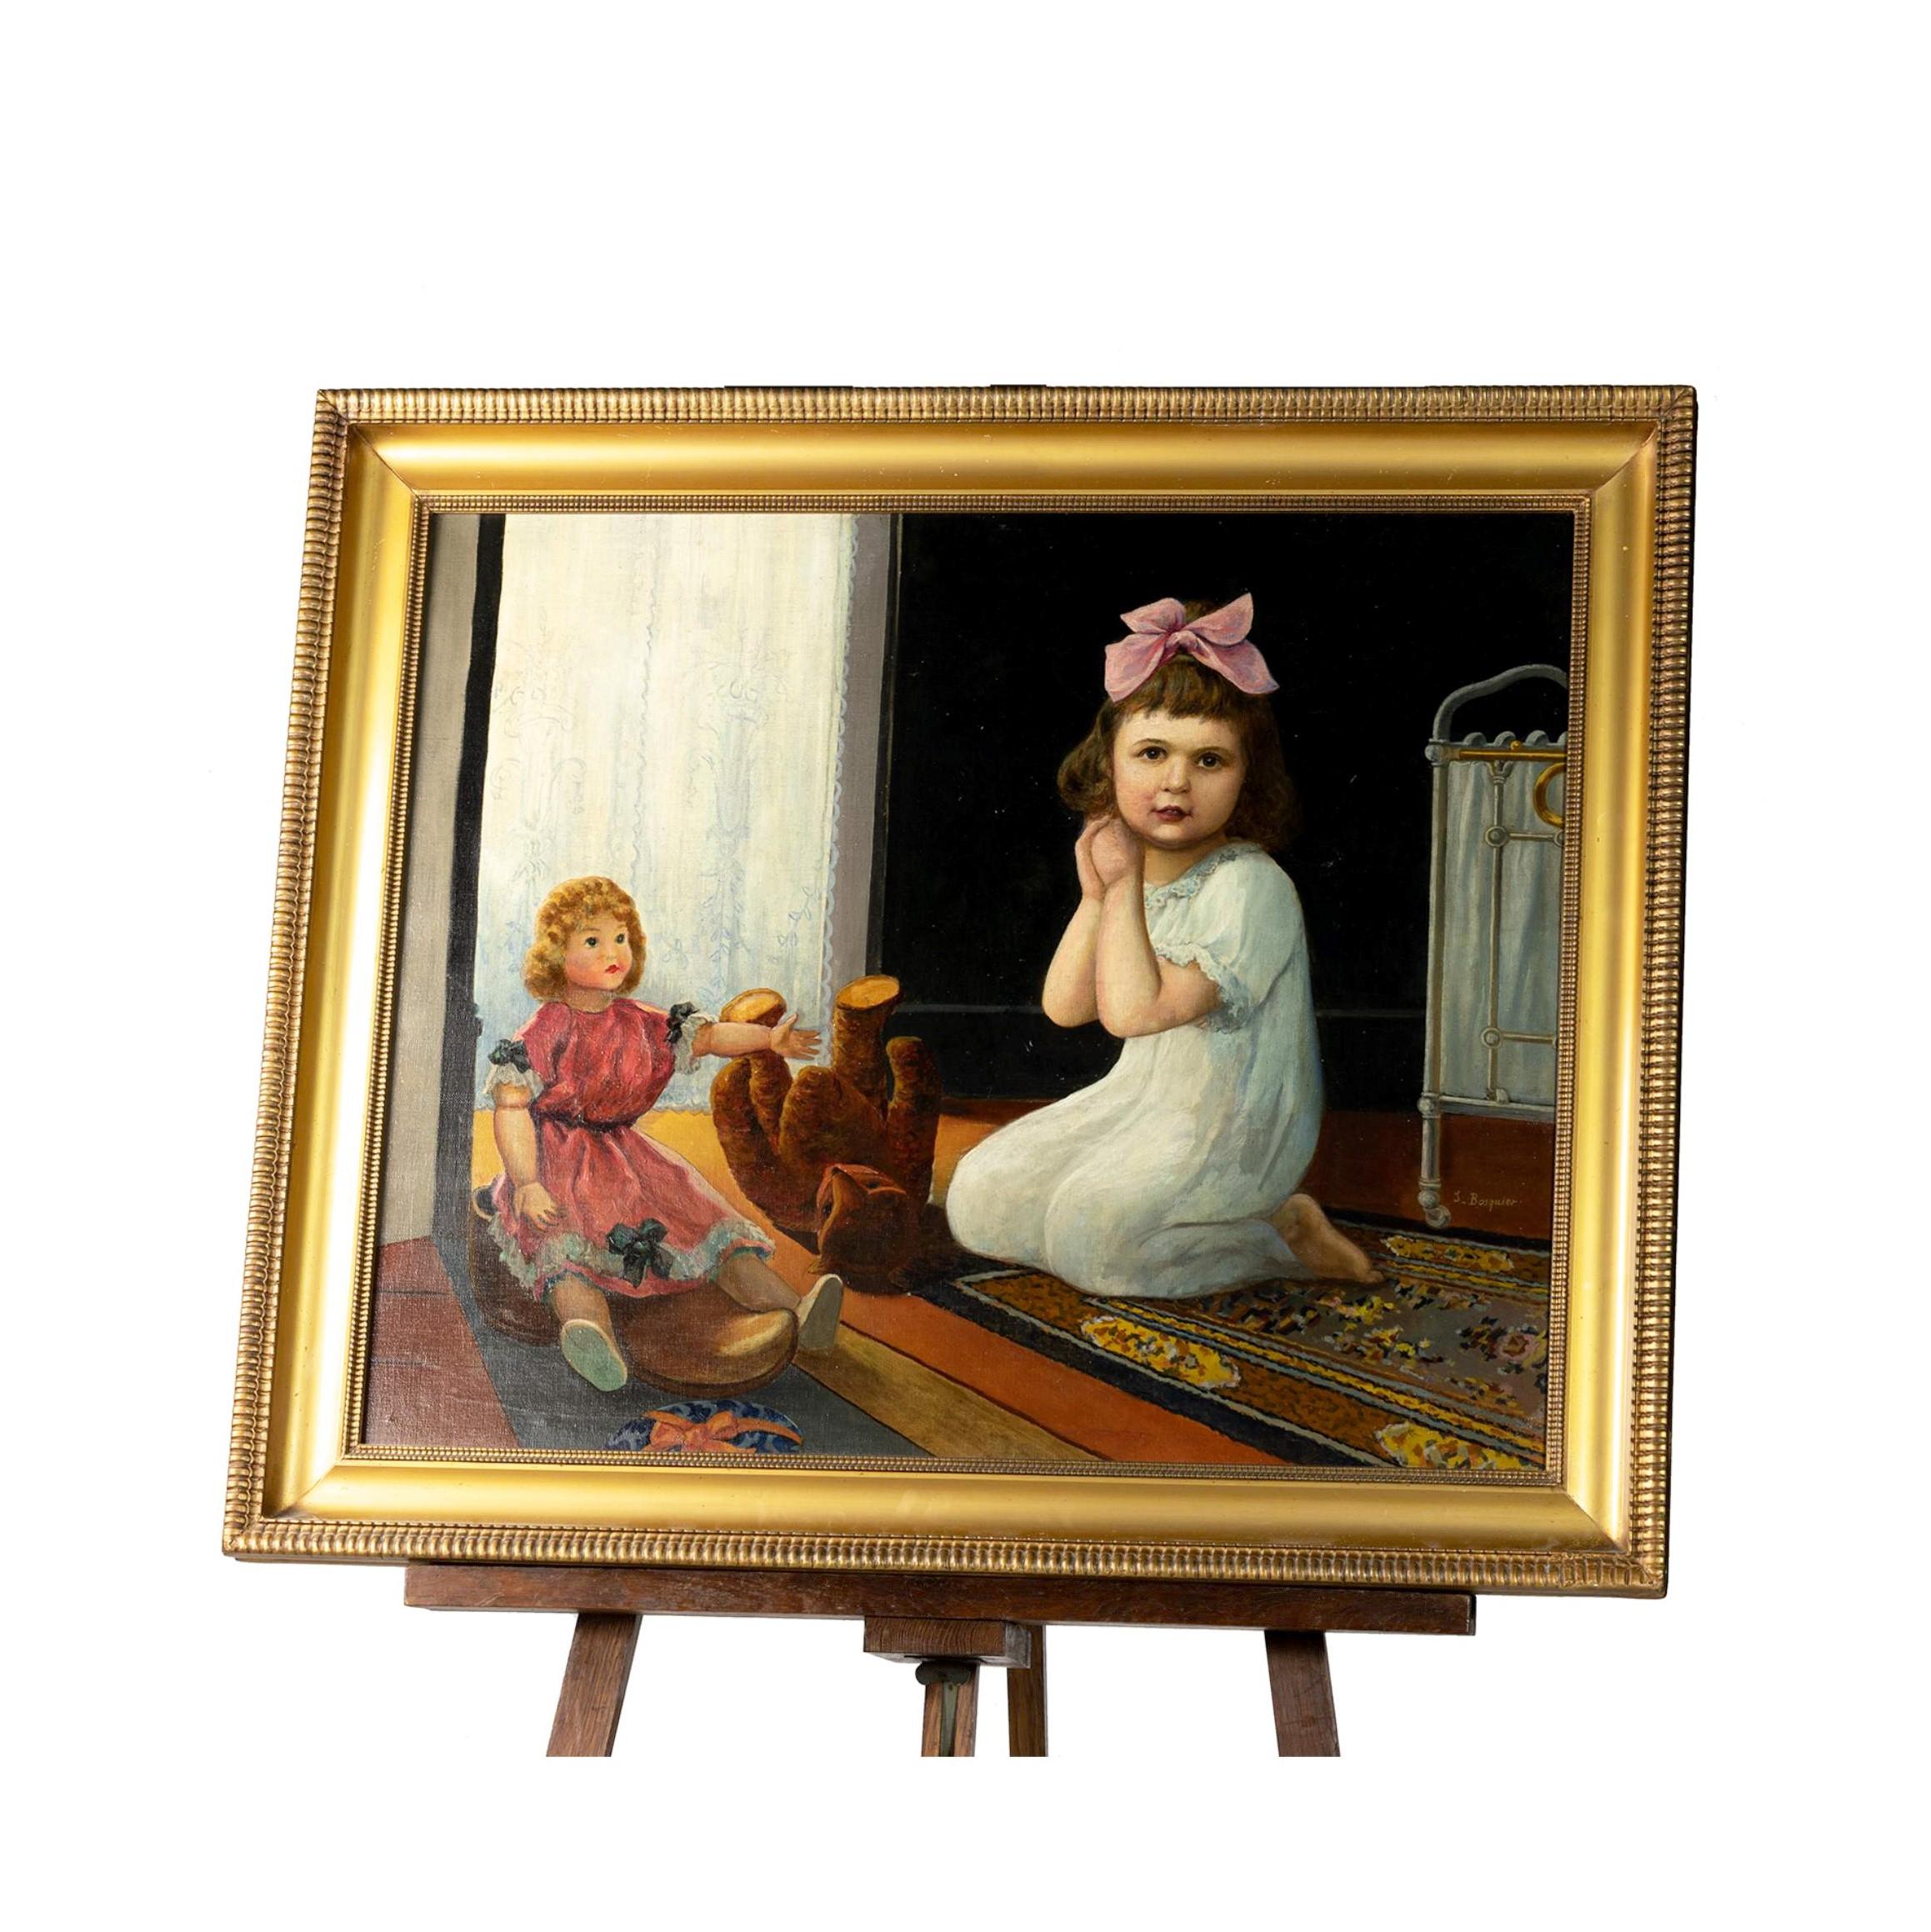 A painting of a young child witha stuffed toy and a doll in her nursery room.
Oil on canvas.
‘ J Bosquier ‘ signed on the right side.
Charles Joseph Bosquier  (1824–1880)

Frame: 37,59 in (95,5 cm) x 31,88 in (81 cm) 
Canvas: 31,88 in (81 cm) x